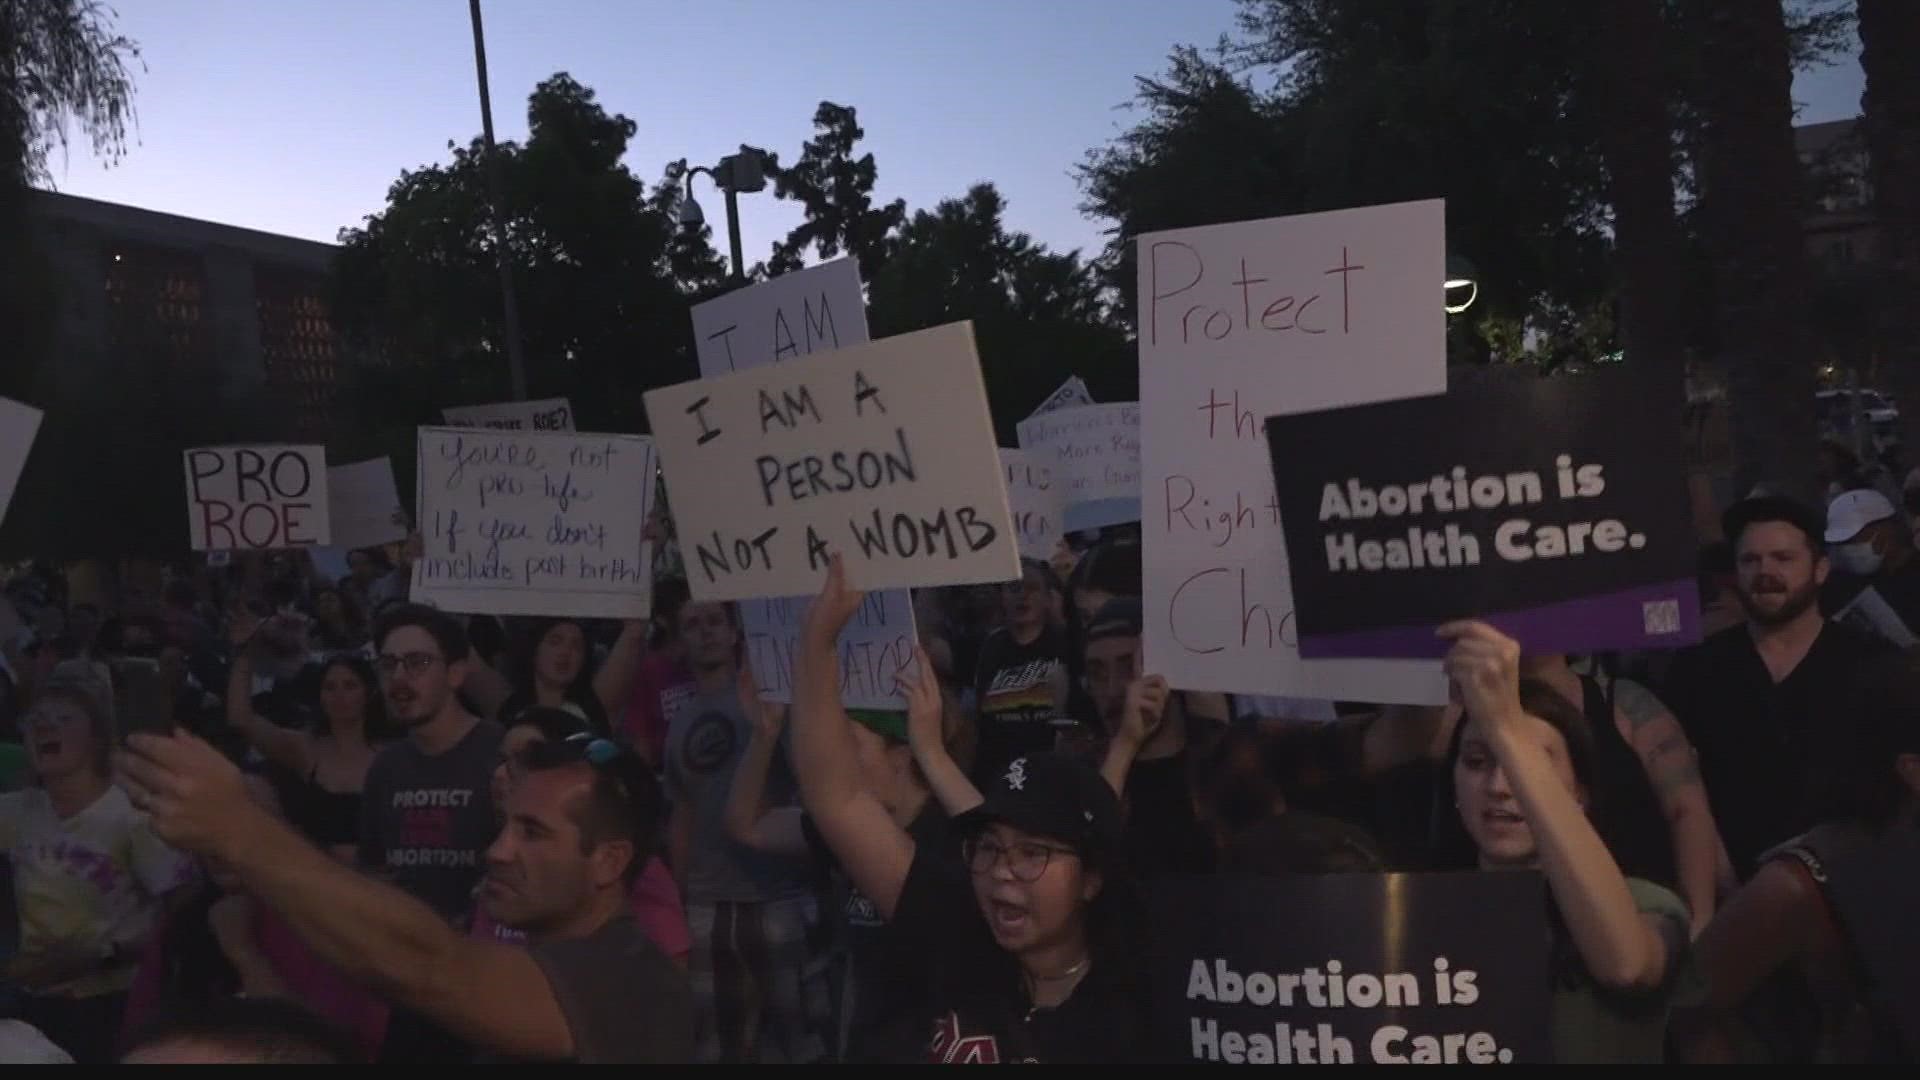 Emotions ran high at the Arizona capitol Tuesday night more than 24 hours after a draft of the Supreme Court’s decision to overturn Roe v. Wade was leaked.